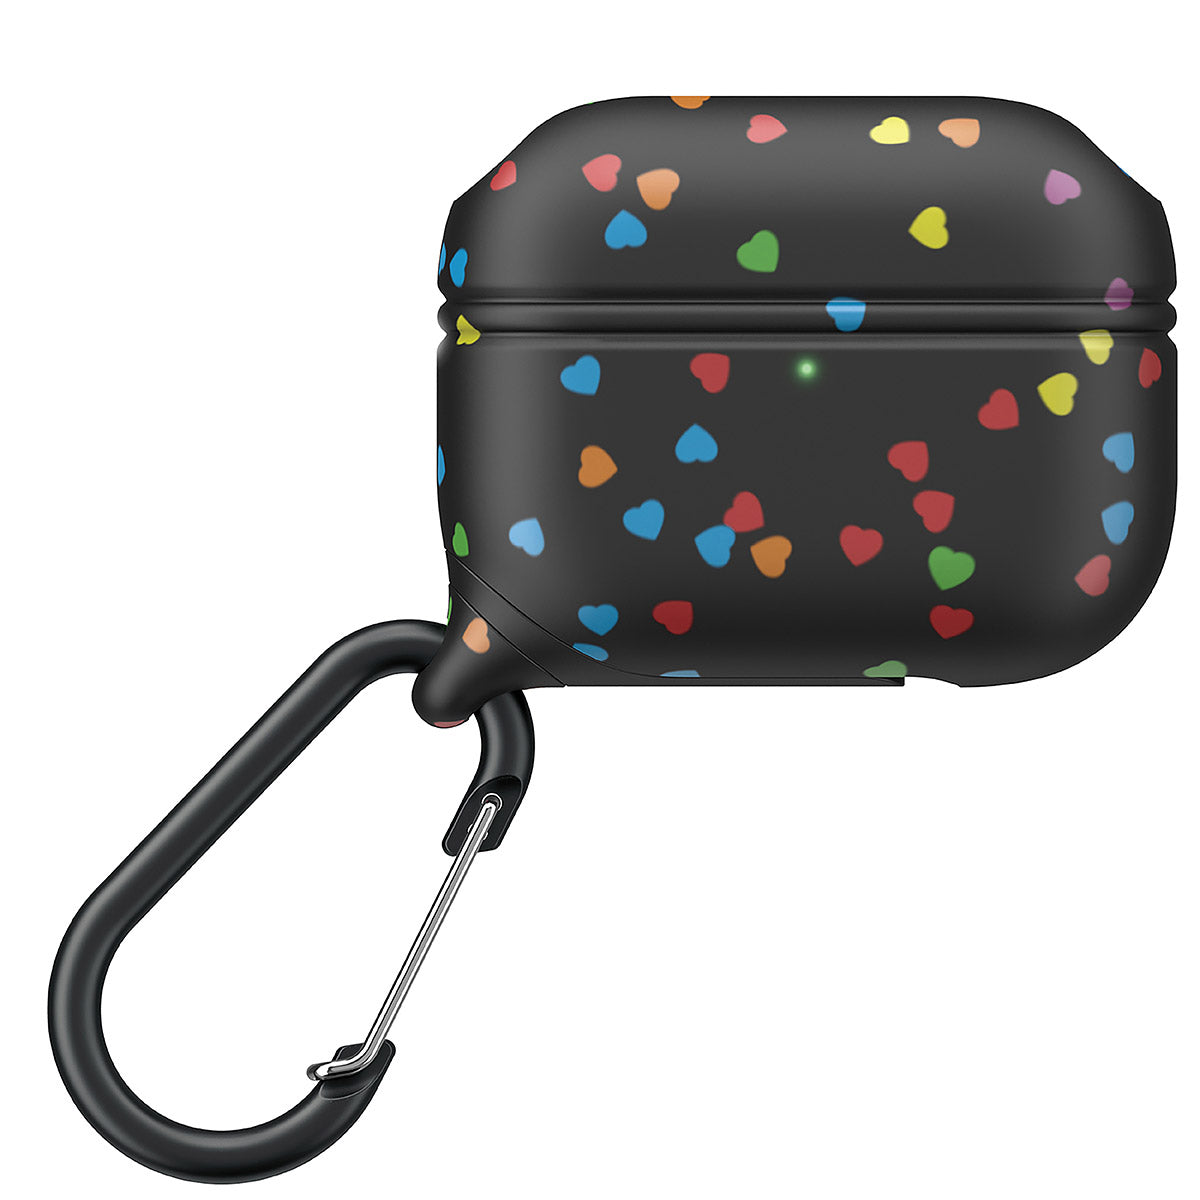 CATAPLAPDPROHTB | catalyst airpods pro gen 2 1 waterproof case carabiner special edition black with hearts front view